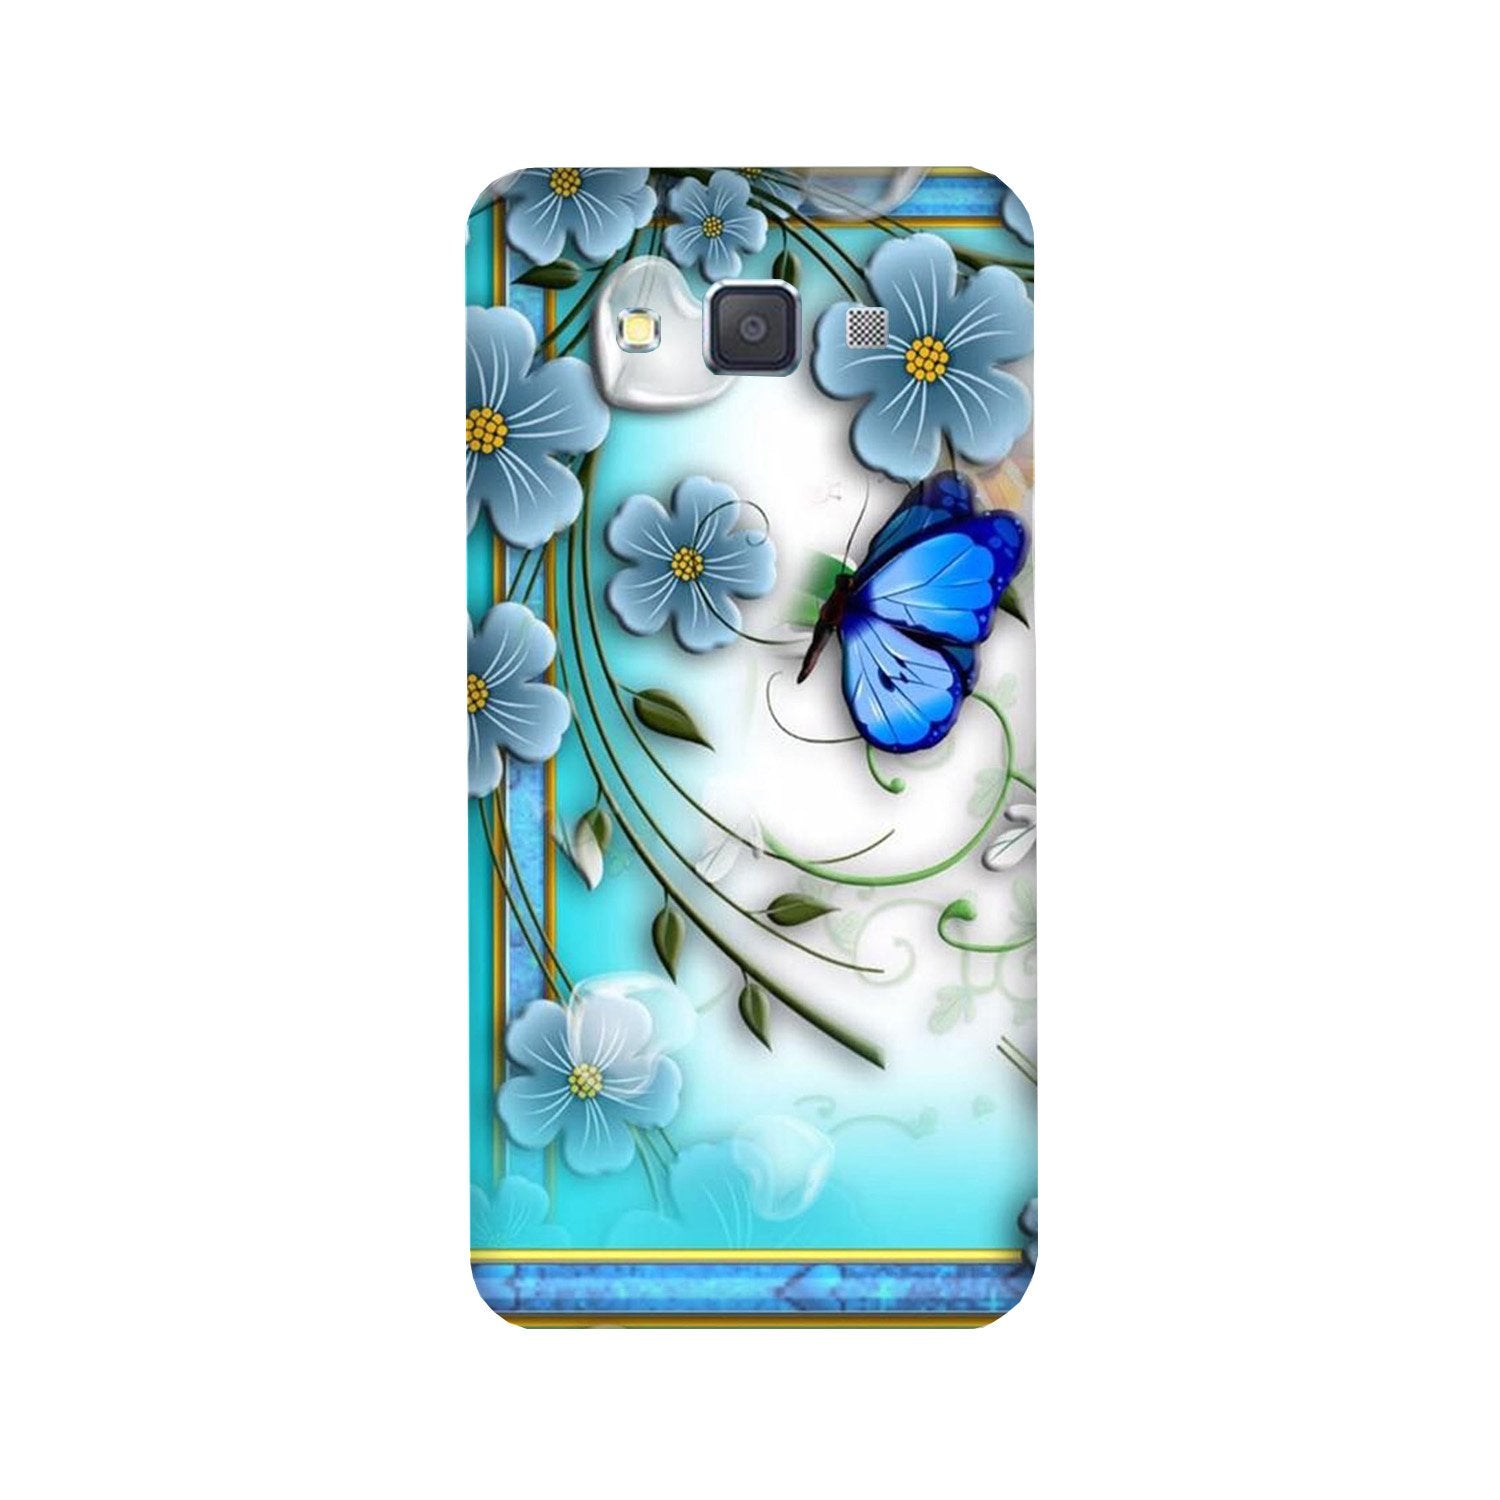 Blue Butterfly Case for Galaxy E7